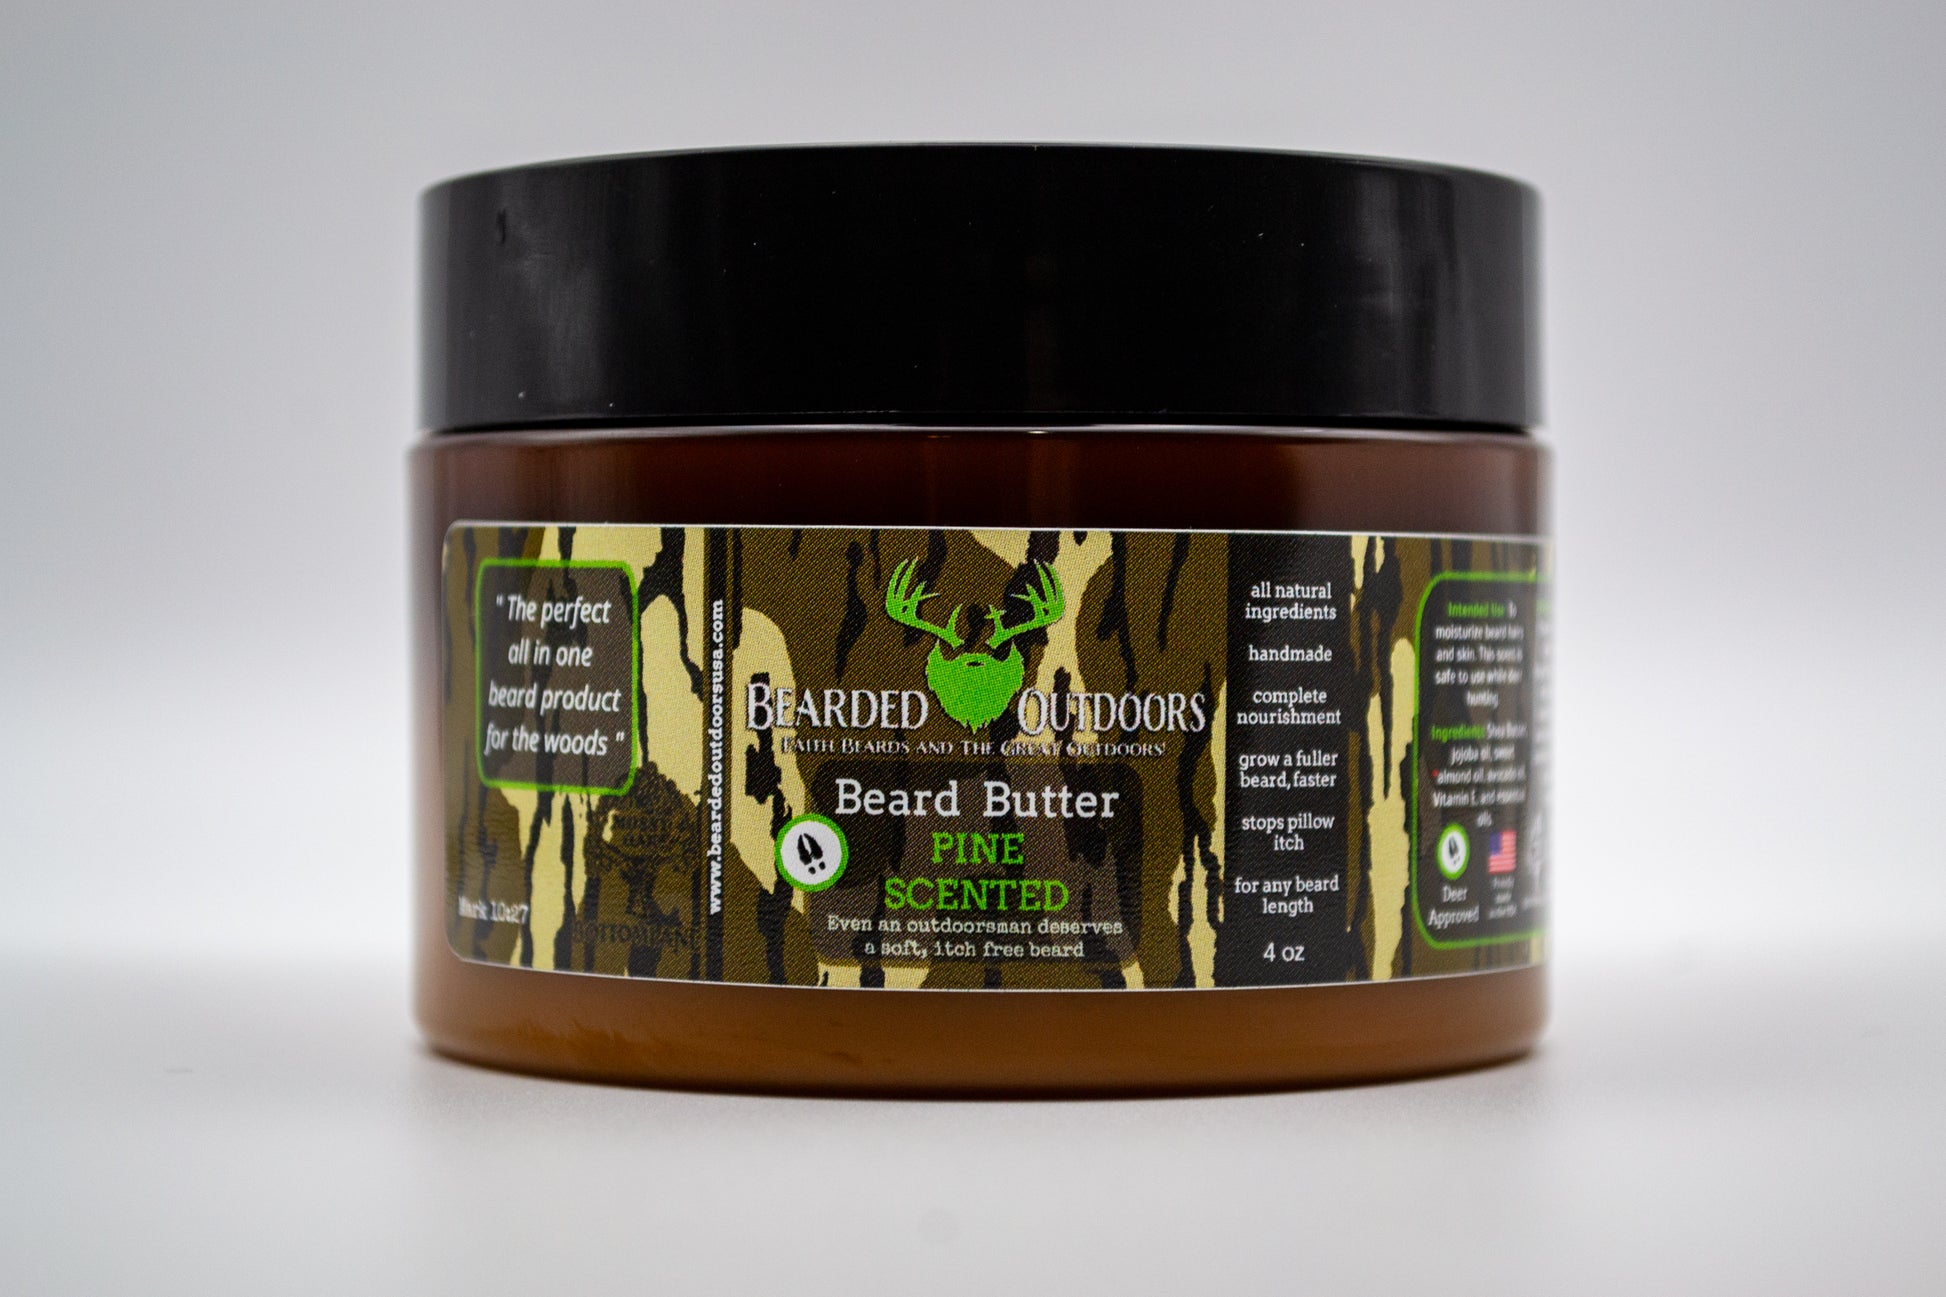 beard butter in mossy oak bottomland, beard products made for hunting, pine scented beard butter